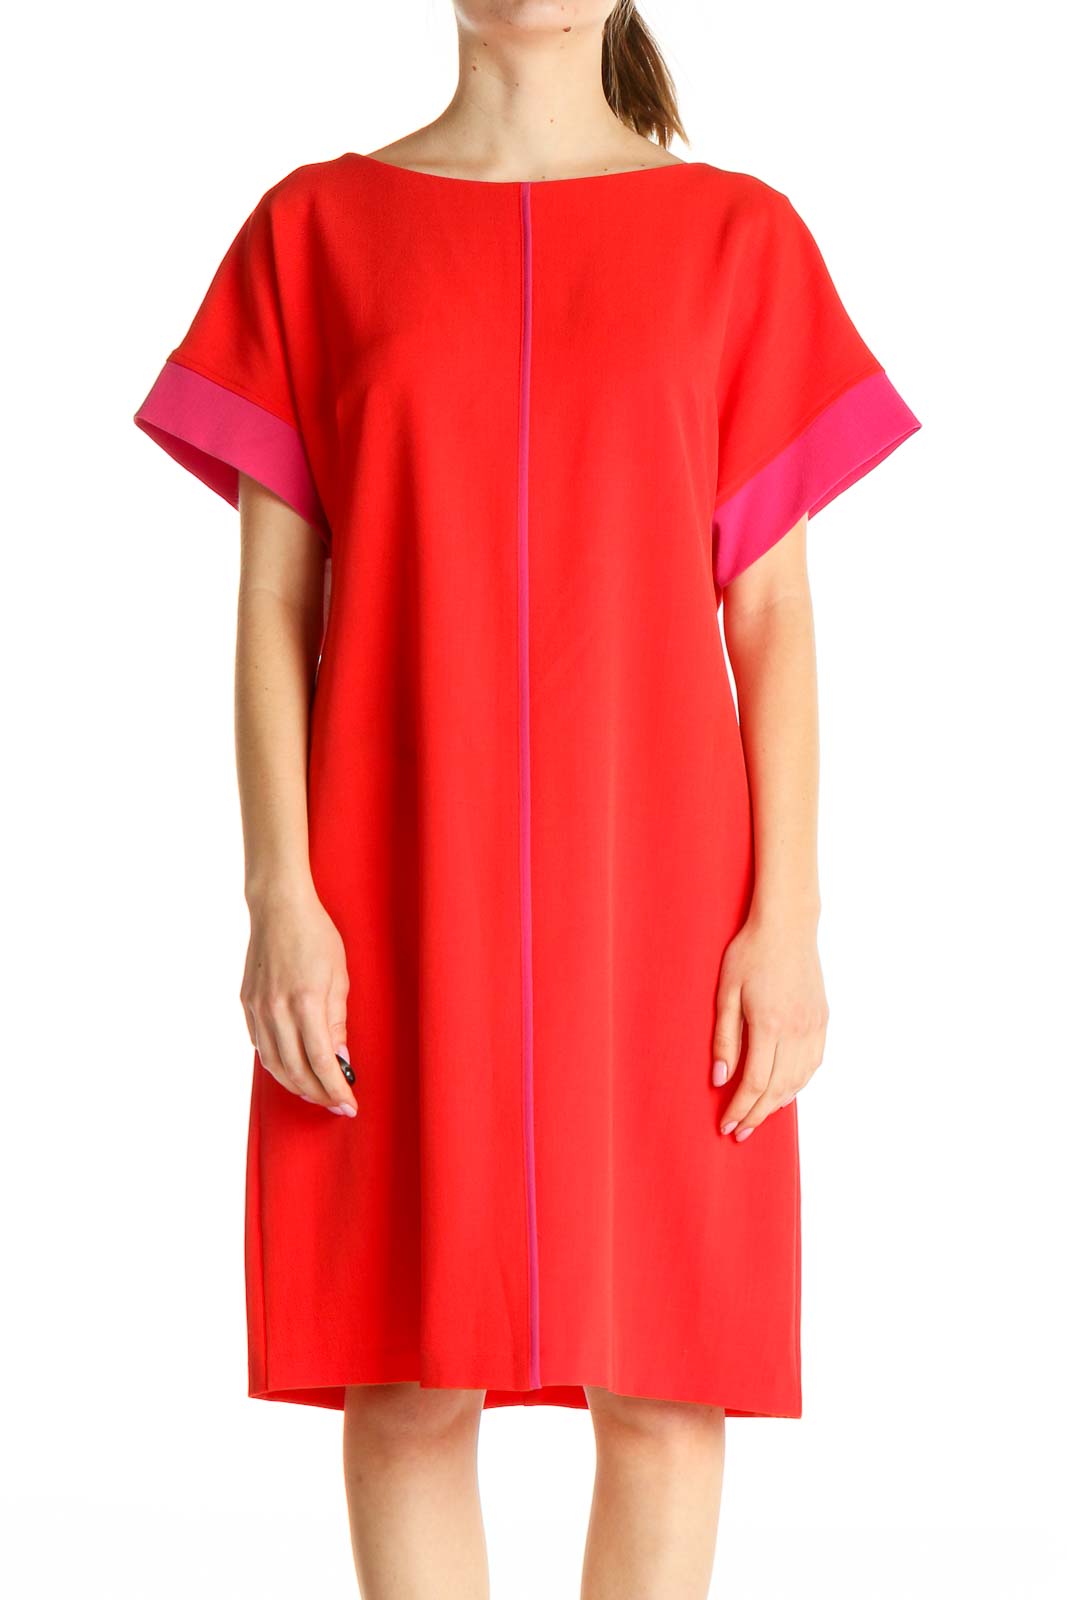 Red Solid Colorblock Shift Dress Front